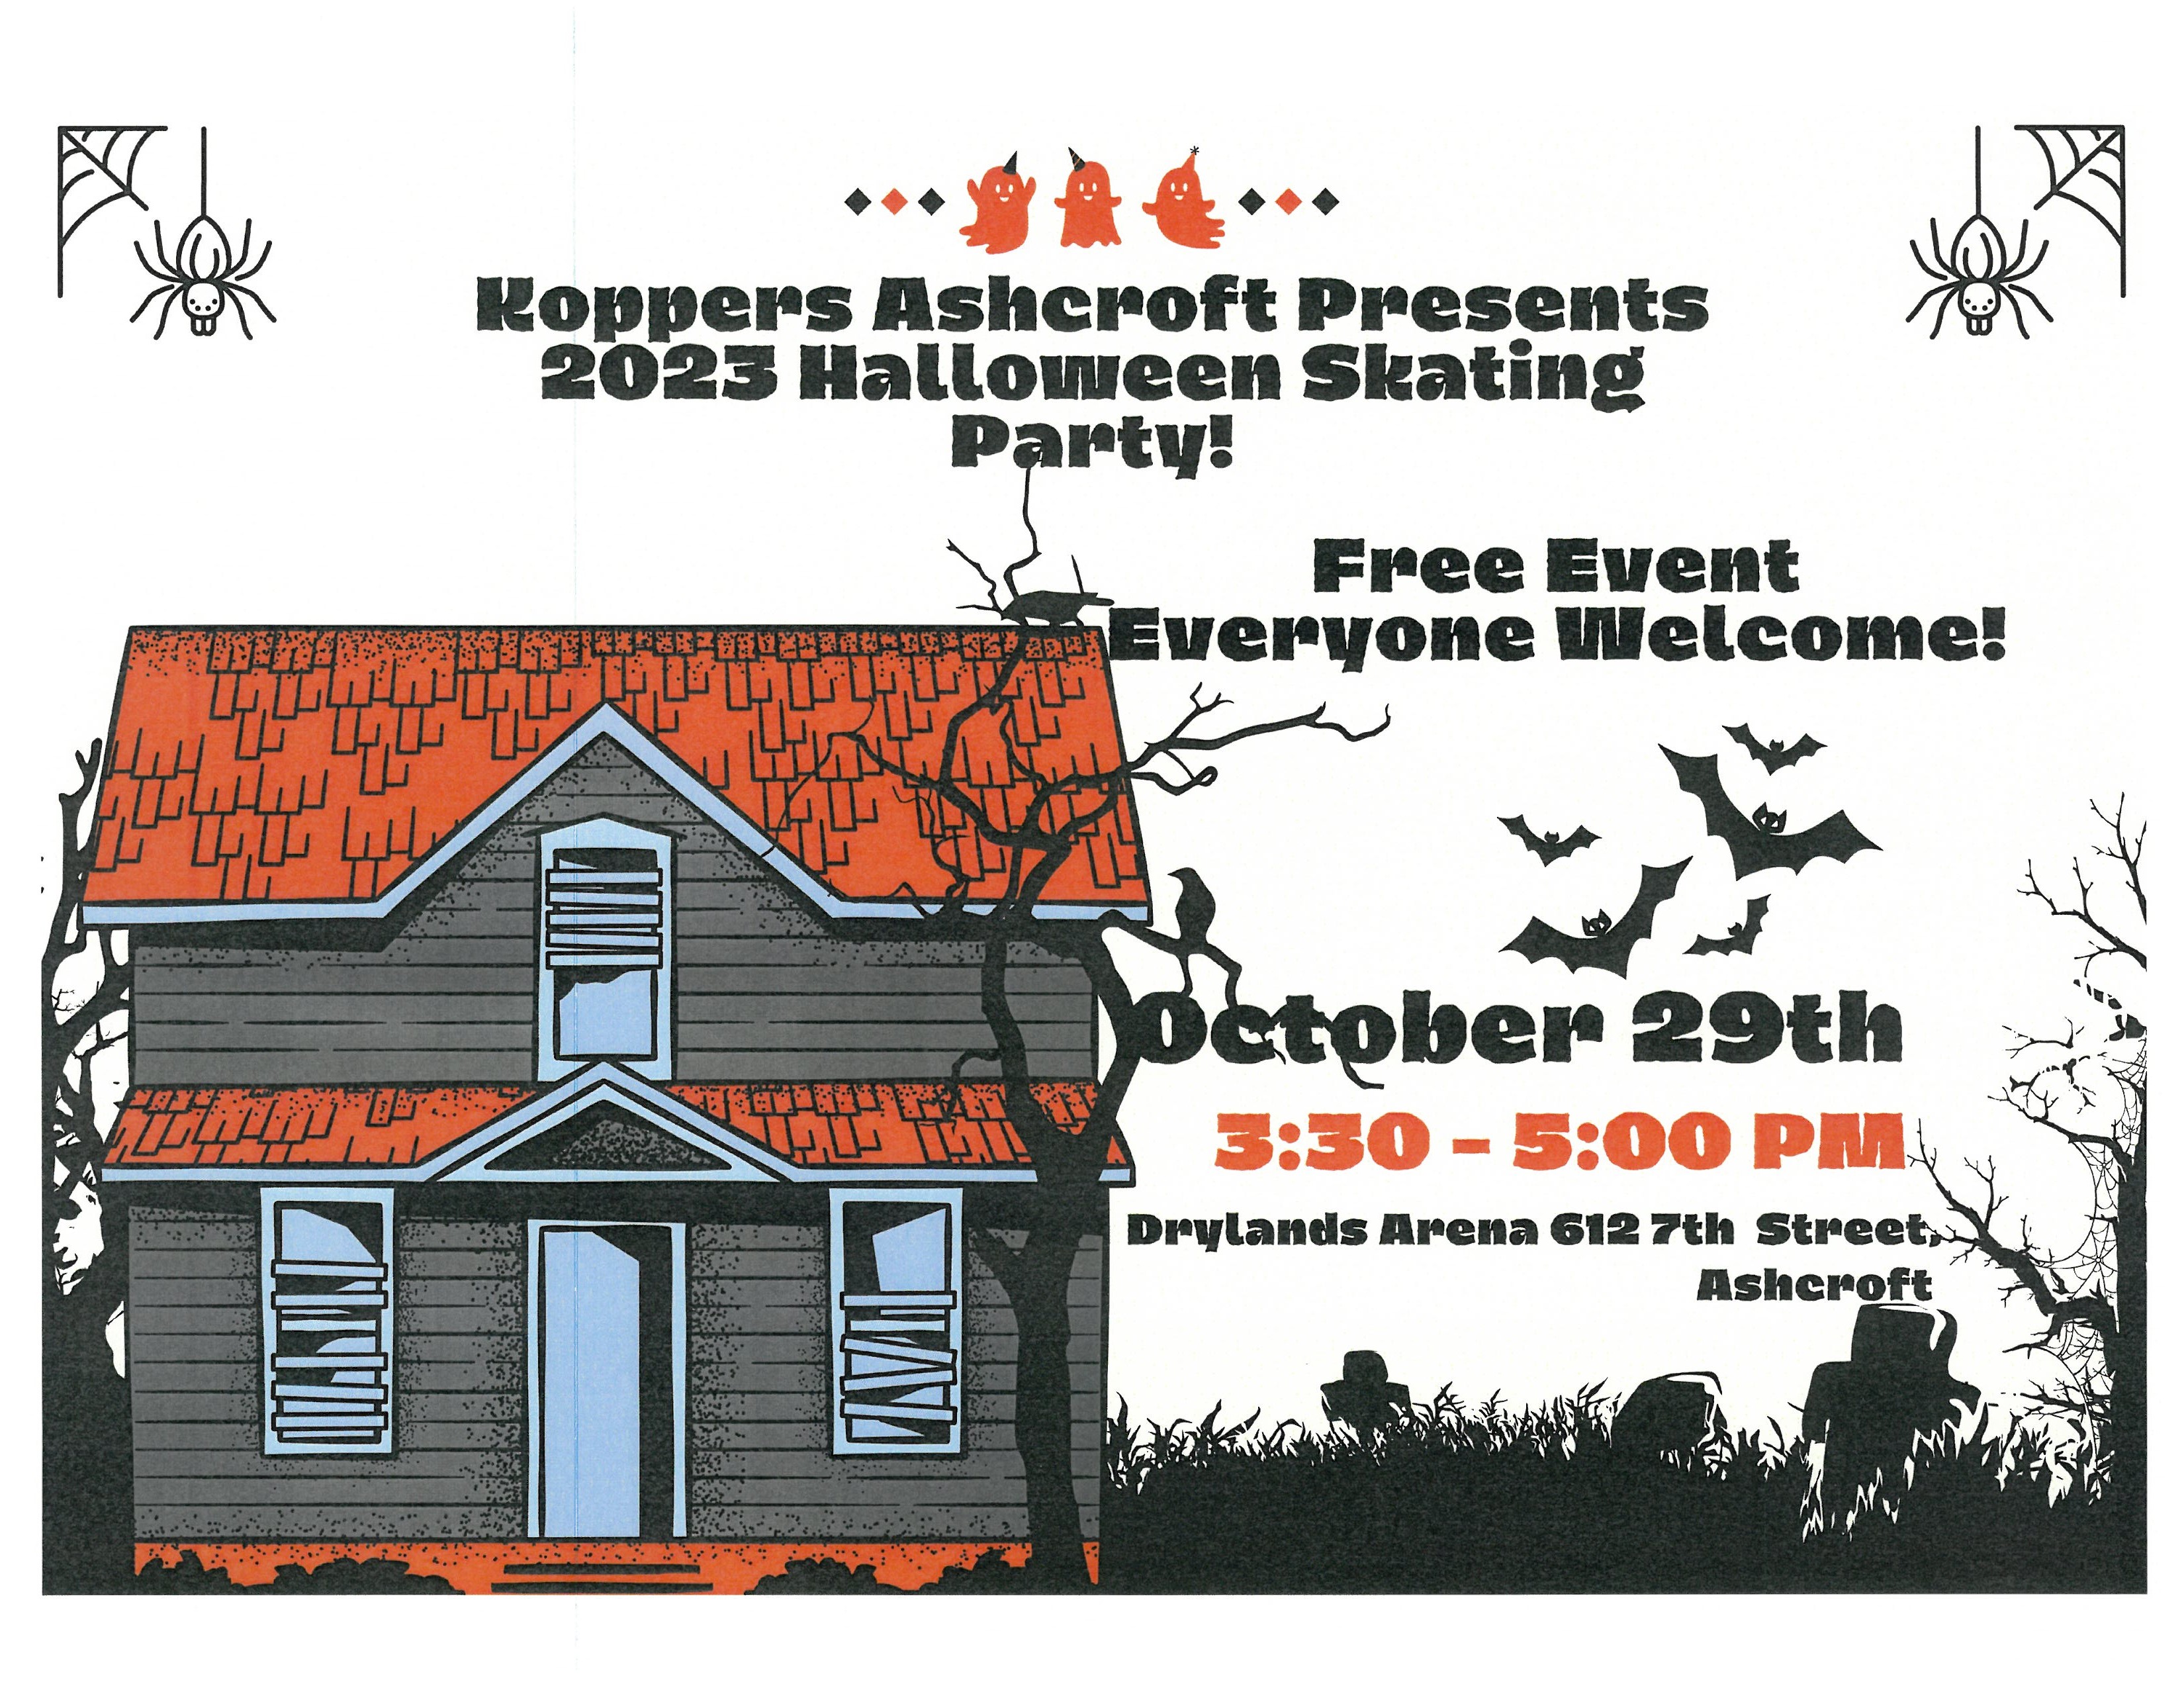 Koppers Ashcroft Presents 2023 Halloween Skating Party